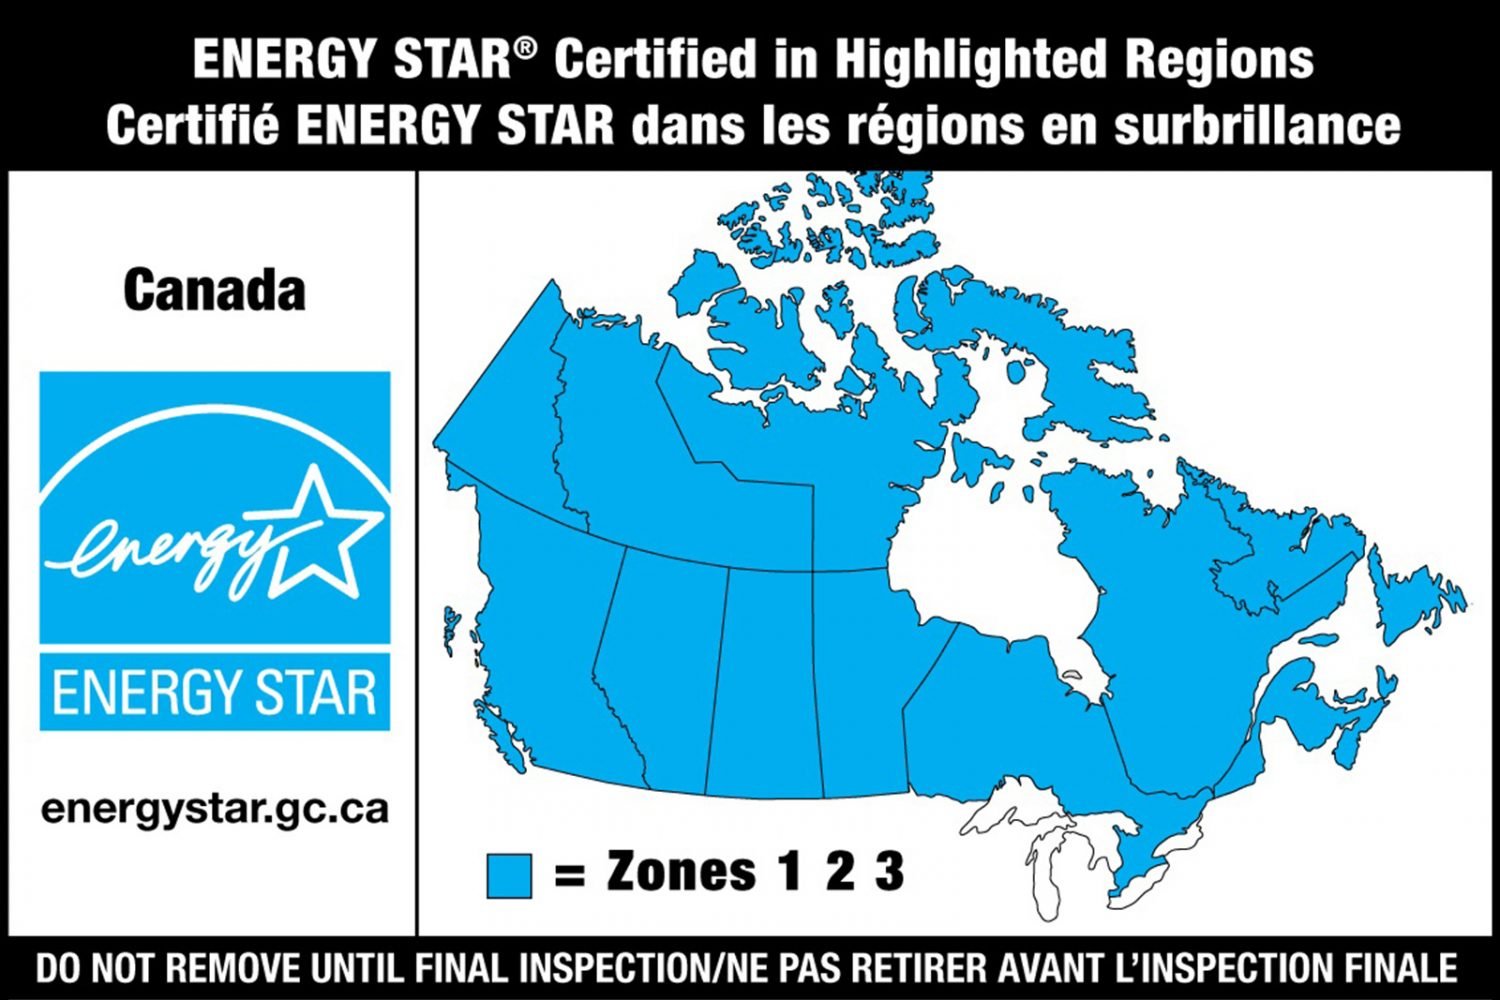 2022 Guidelines for ENERGY STAR® Certified Windows, Doors and Skylights